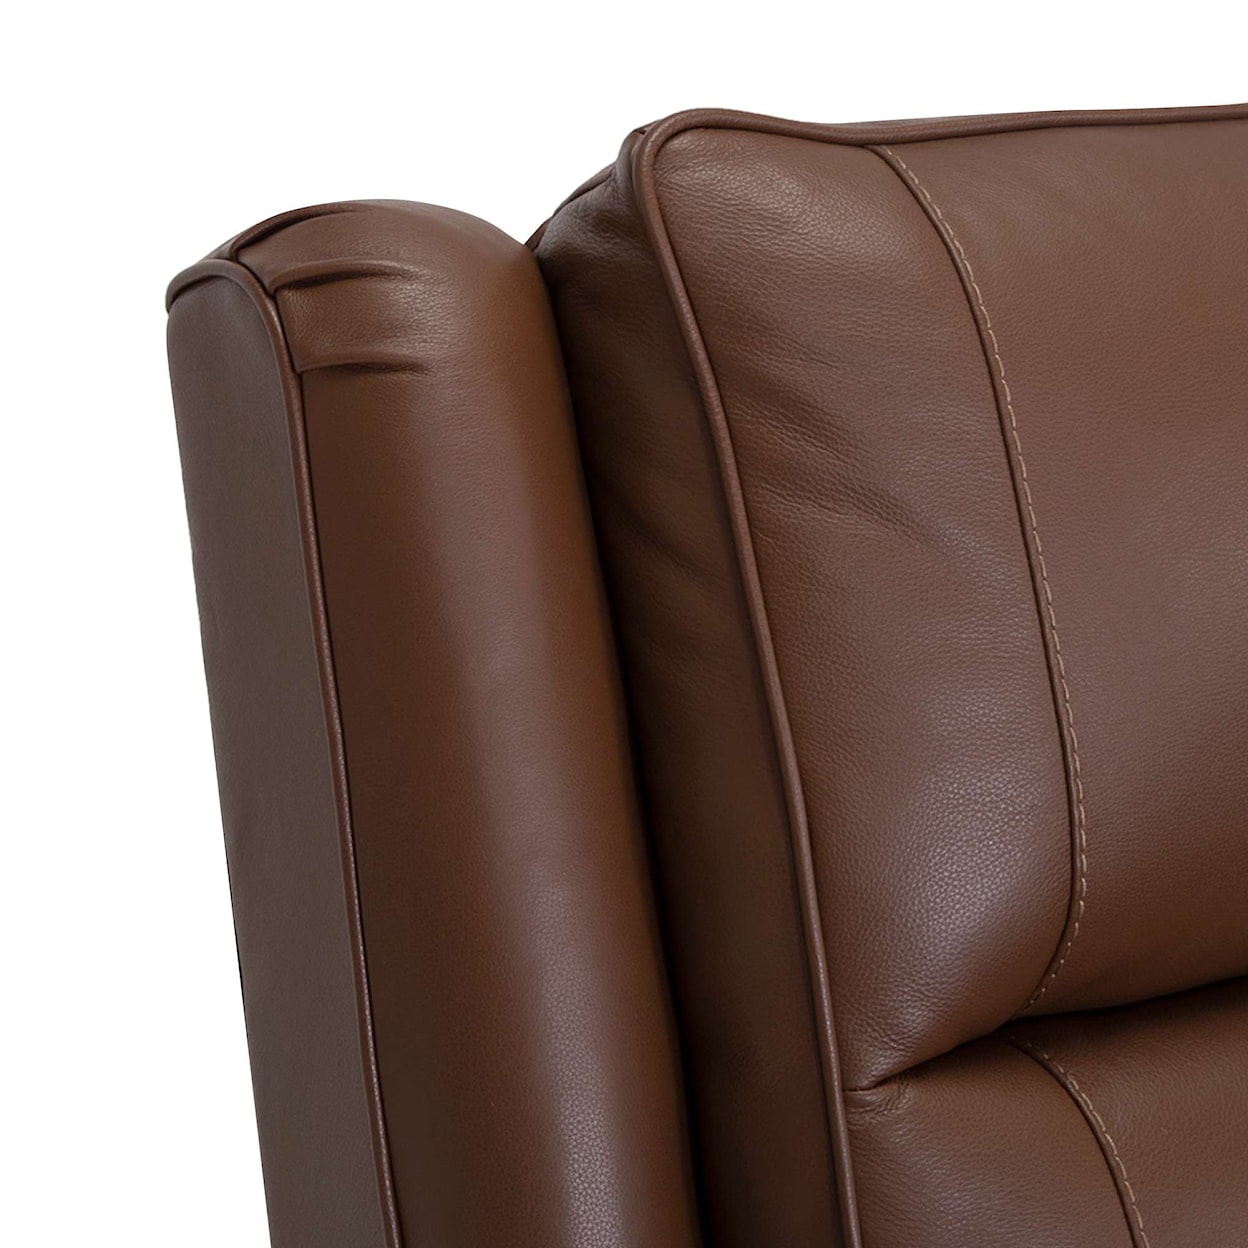 Franklin 690 Charles Lift Recliner with Heated Seat and Massage